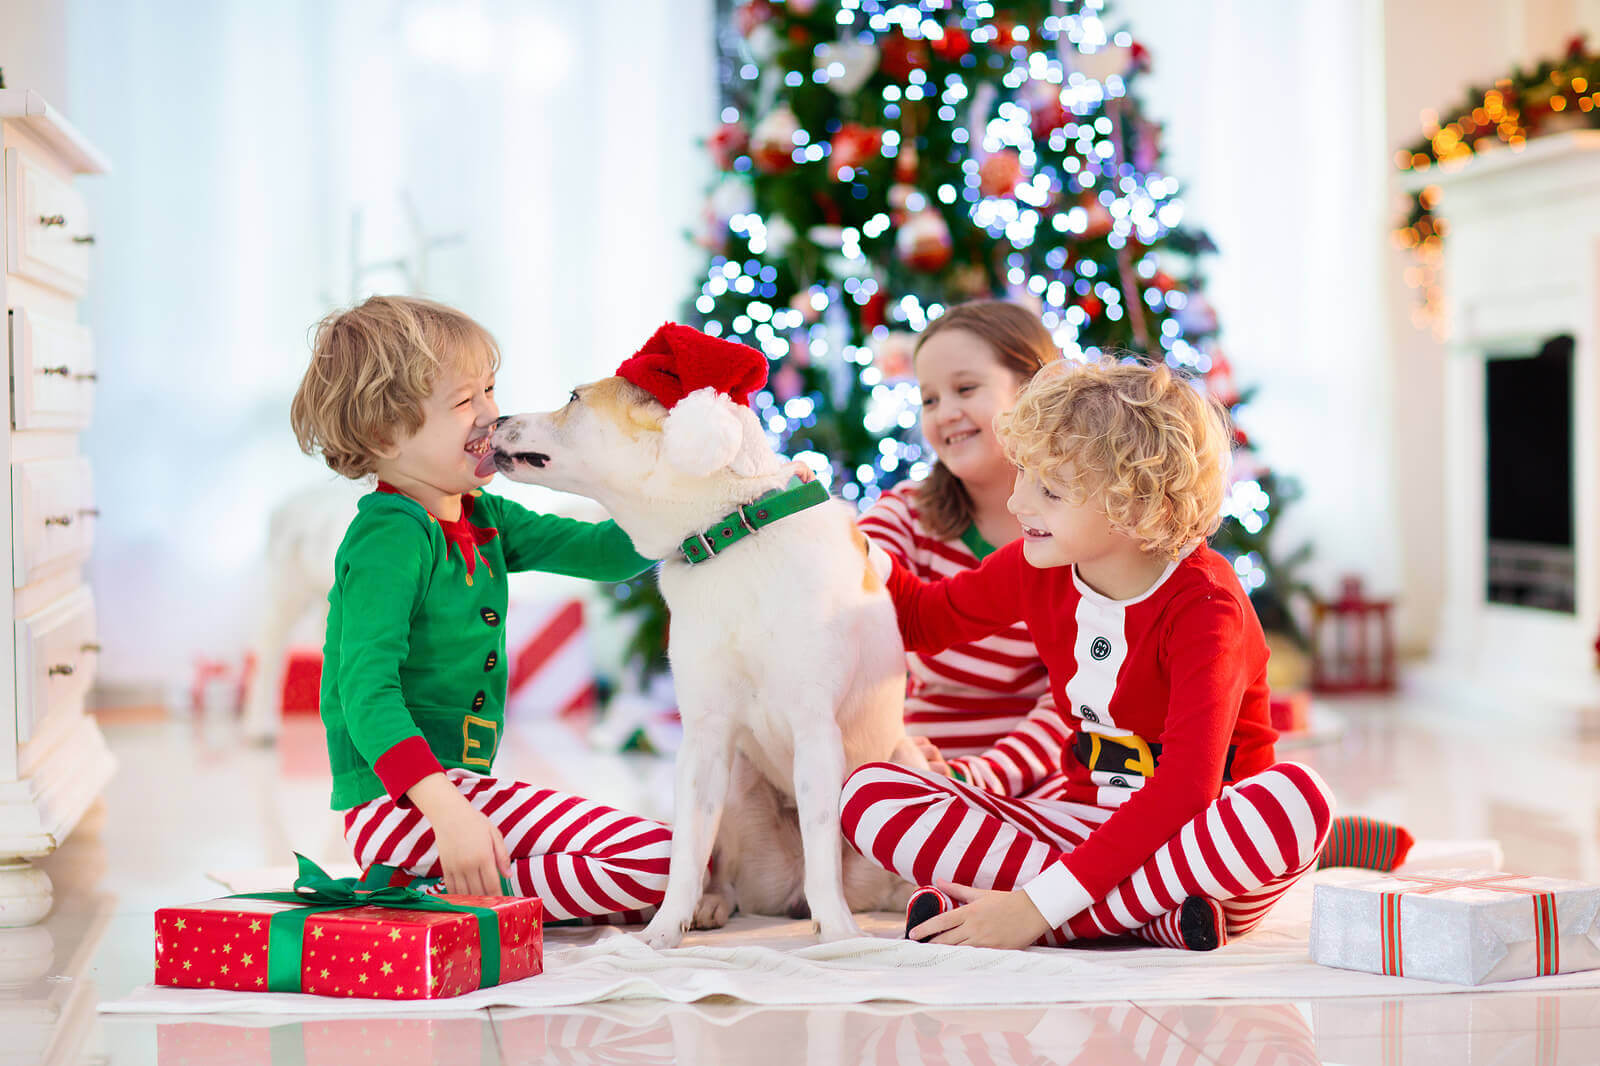 Three siblings wearing Christmas pajamas by the Christmas tree, playing with their dog.